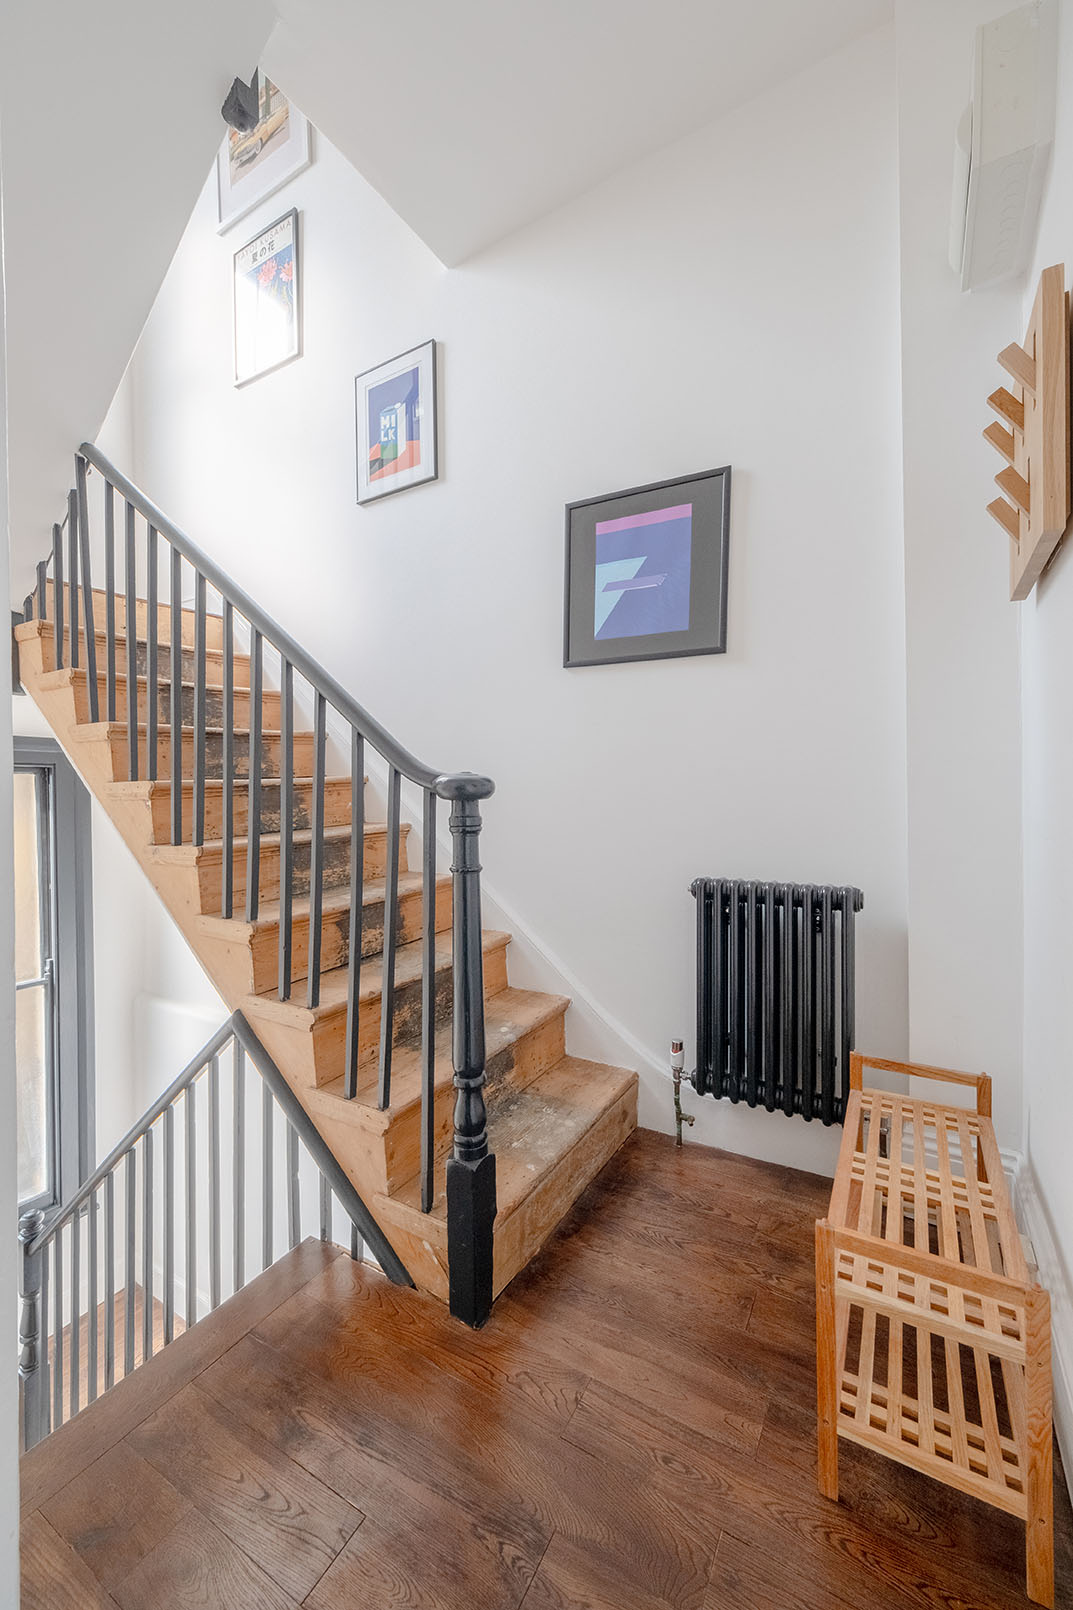 A natural wooden stair with a black painted wooden railing and banister.